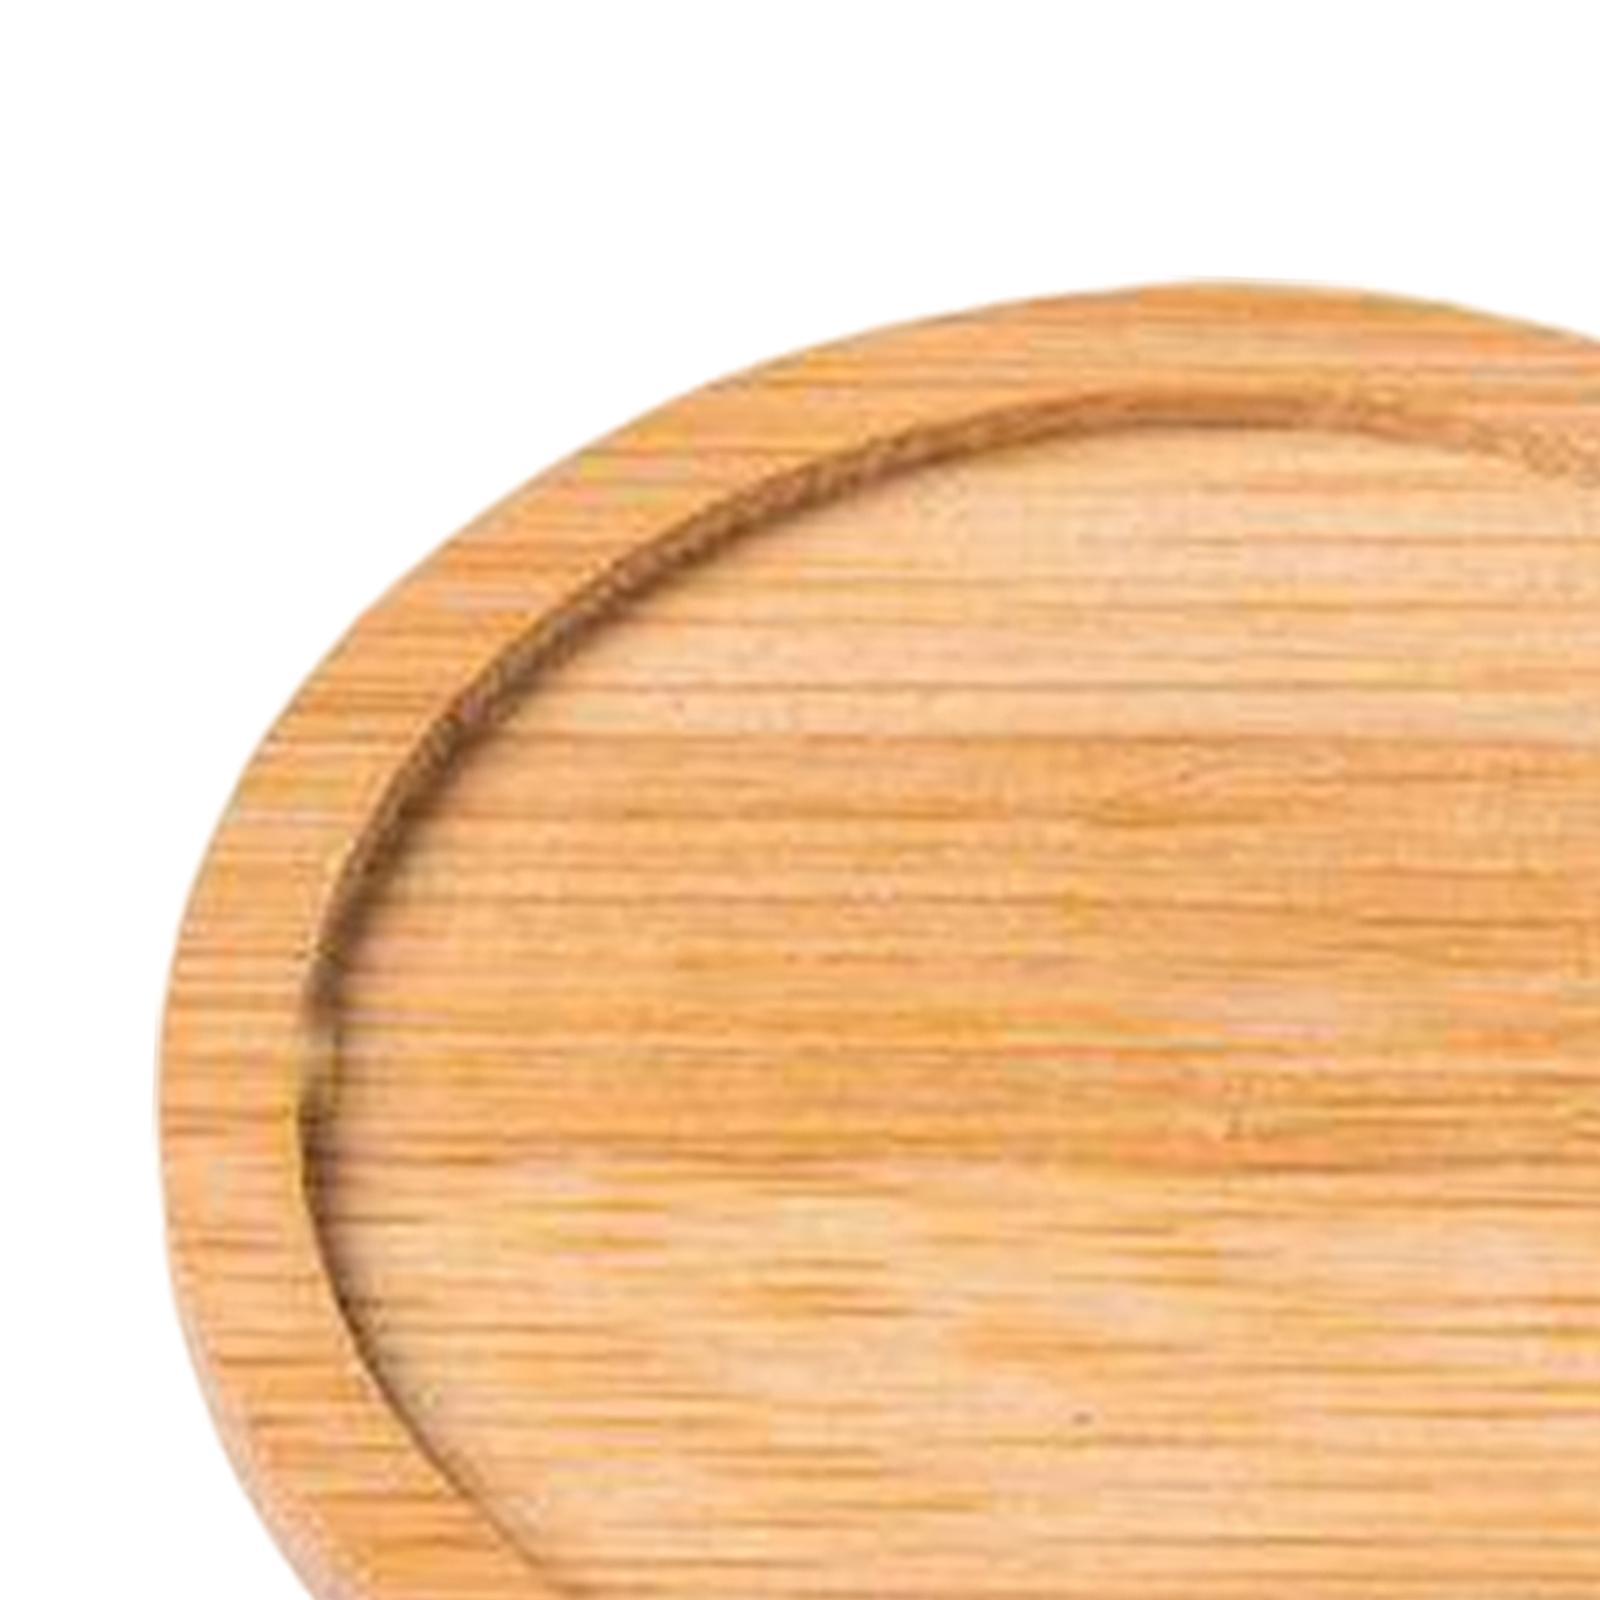 Bamboo Serving Tray Breakfast Trays Food Tray for Living Room Buffet